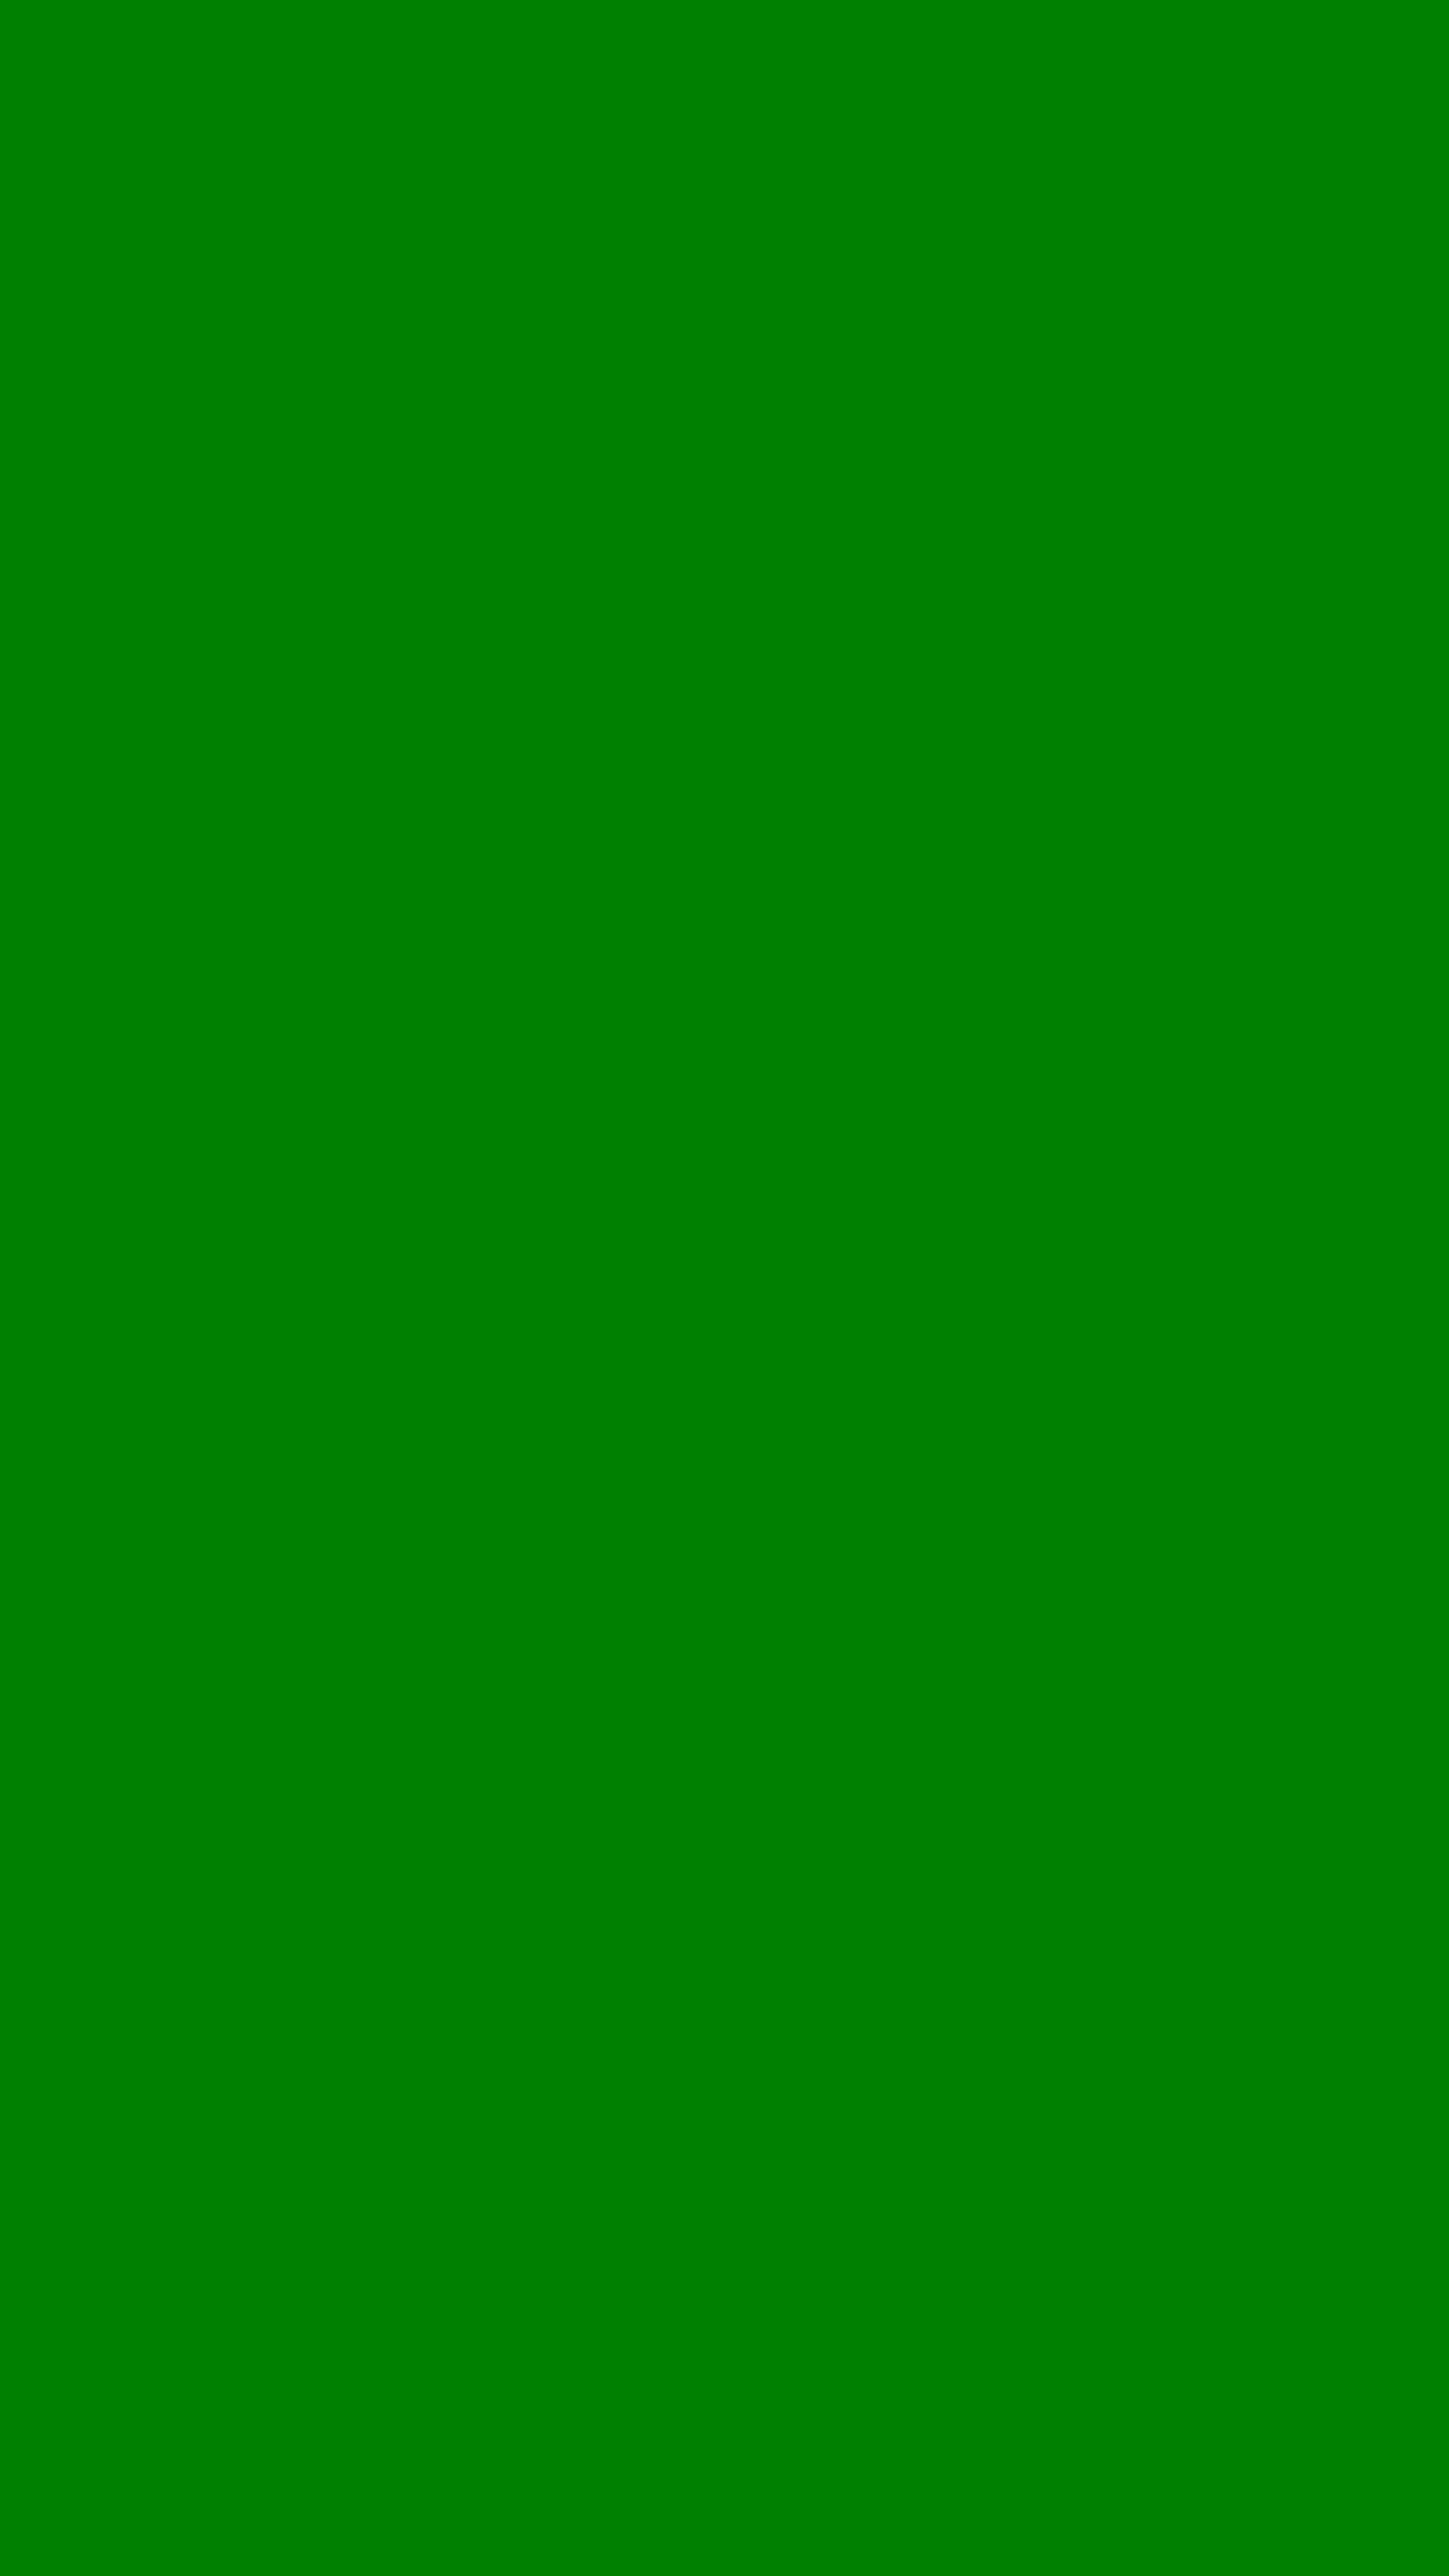 Green Web Color Solid Color Background Wallpaper for Mobile